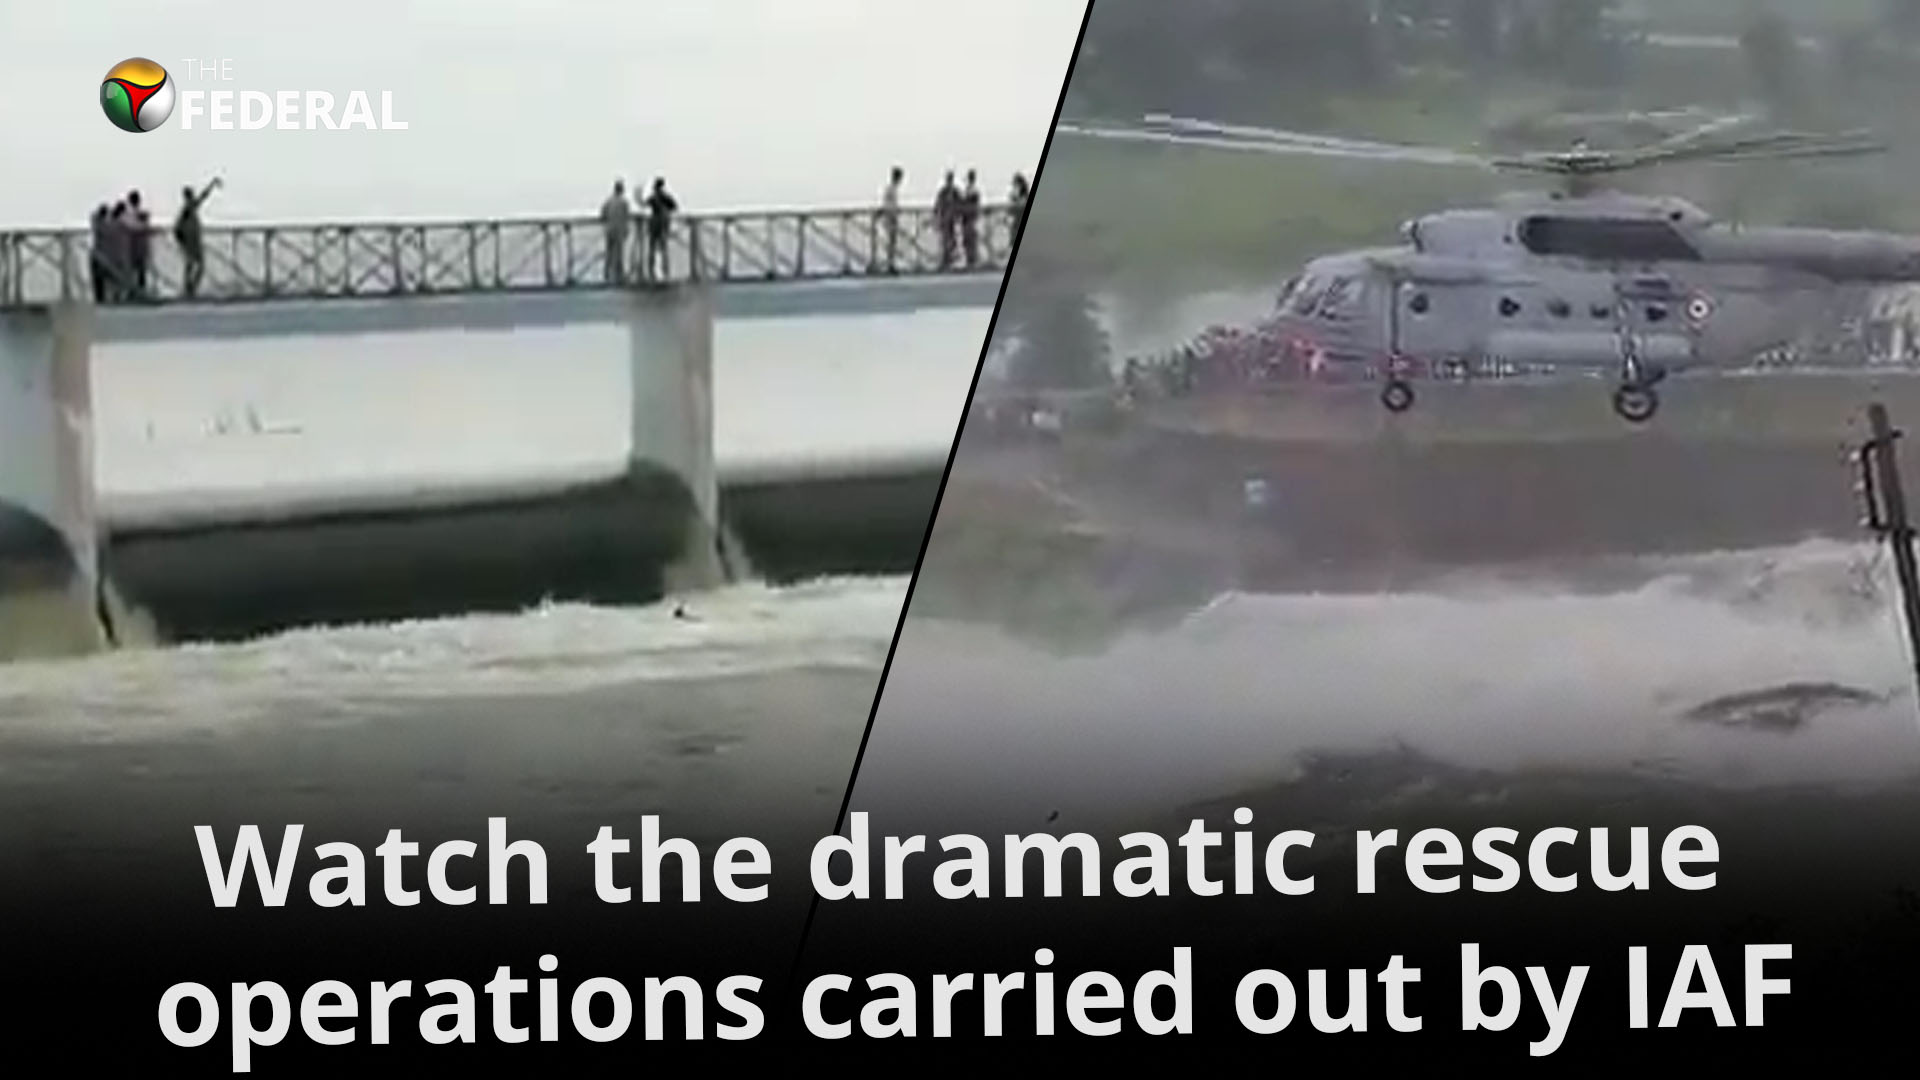 Man stranded amid gushing water, IAF carries out dramatic rescue ops